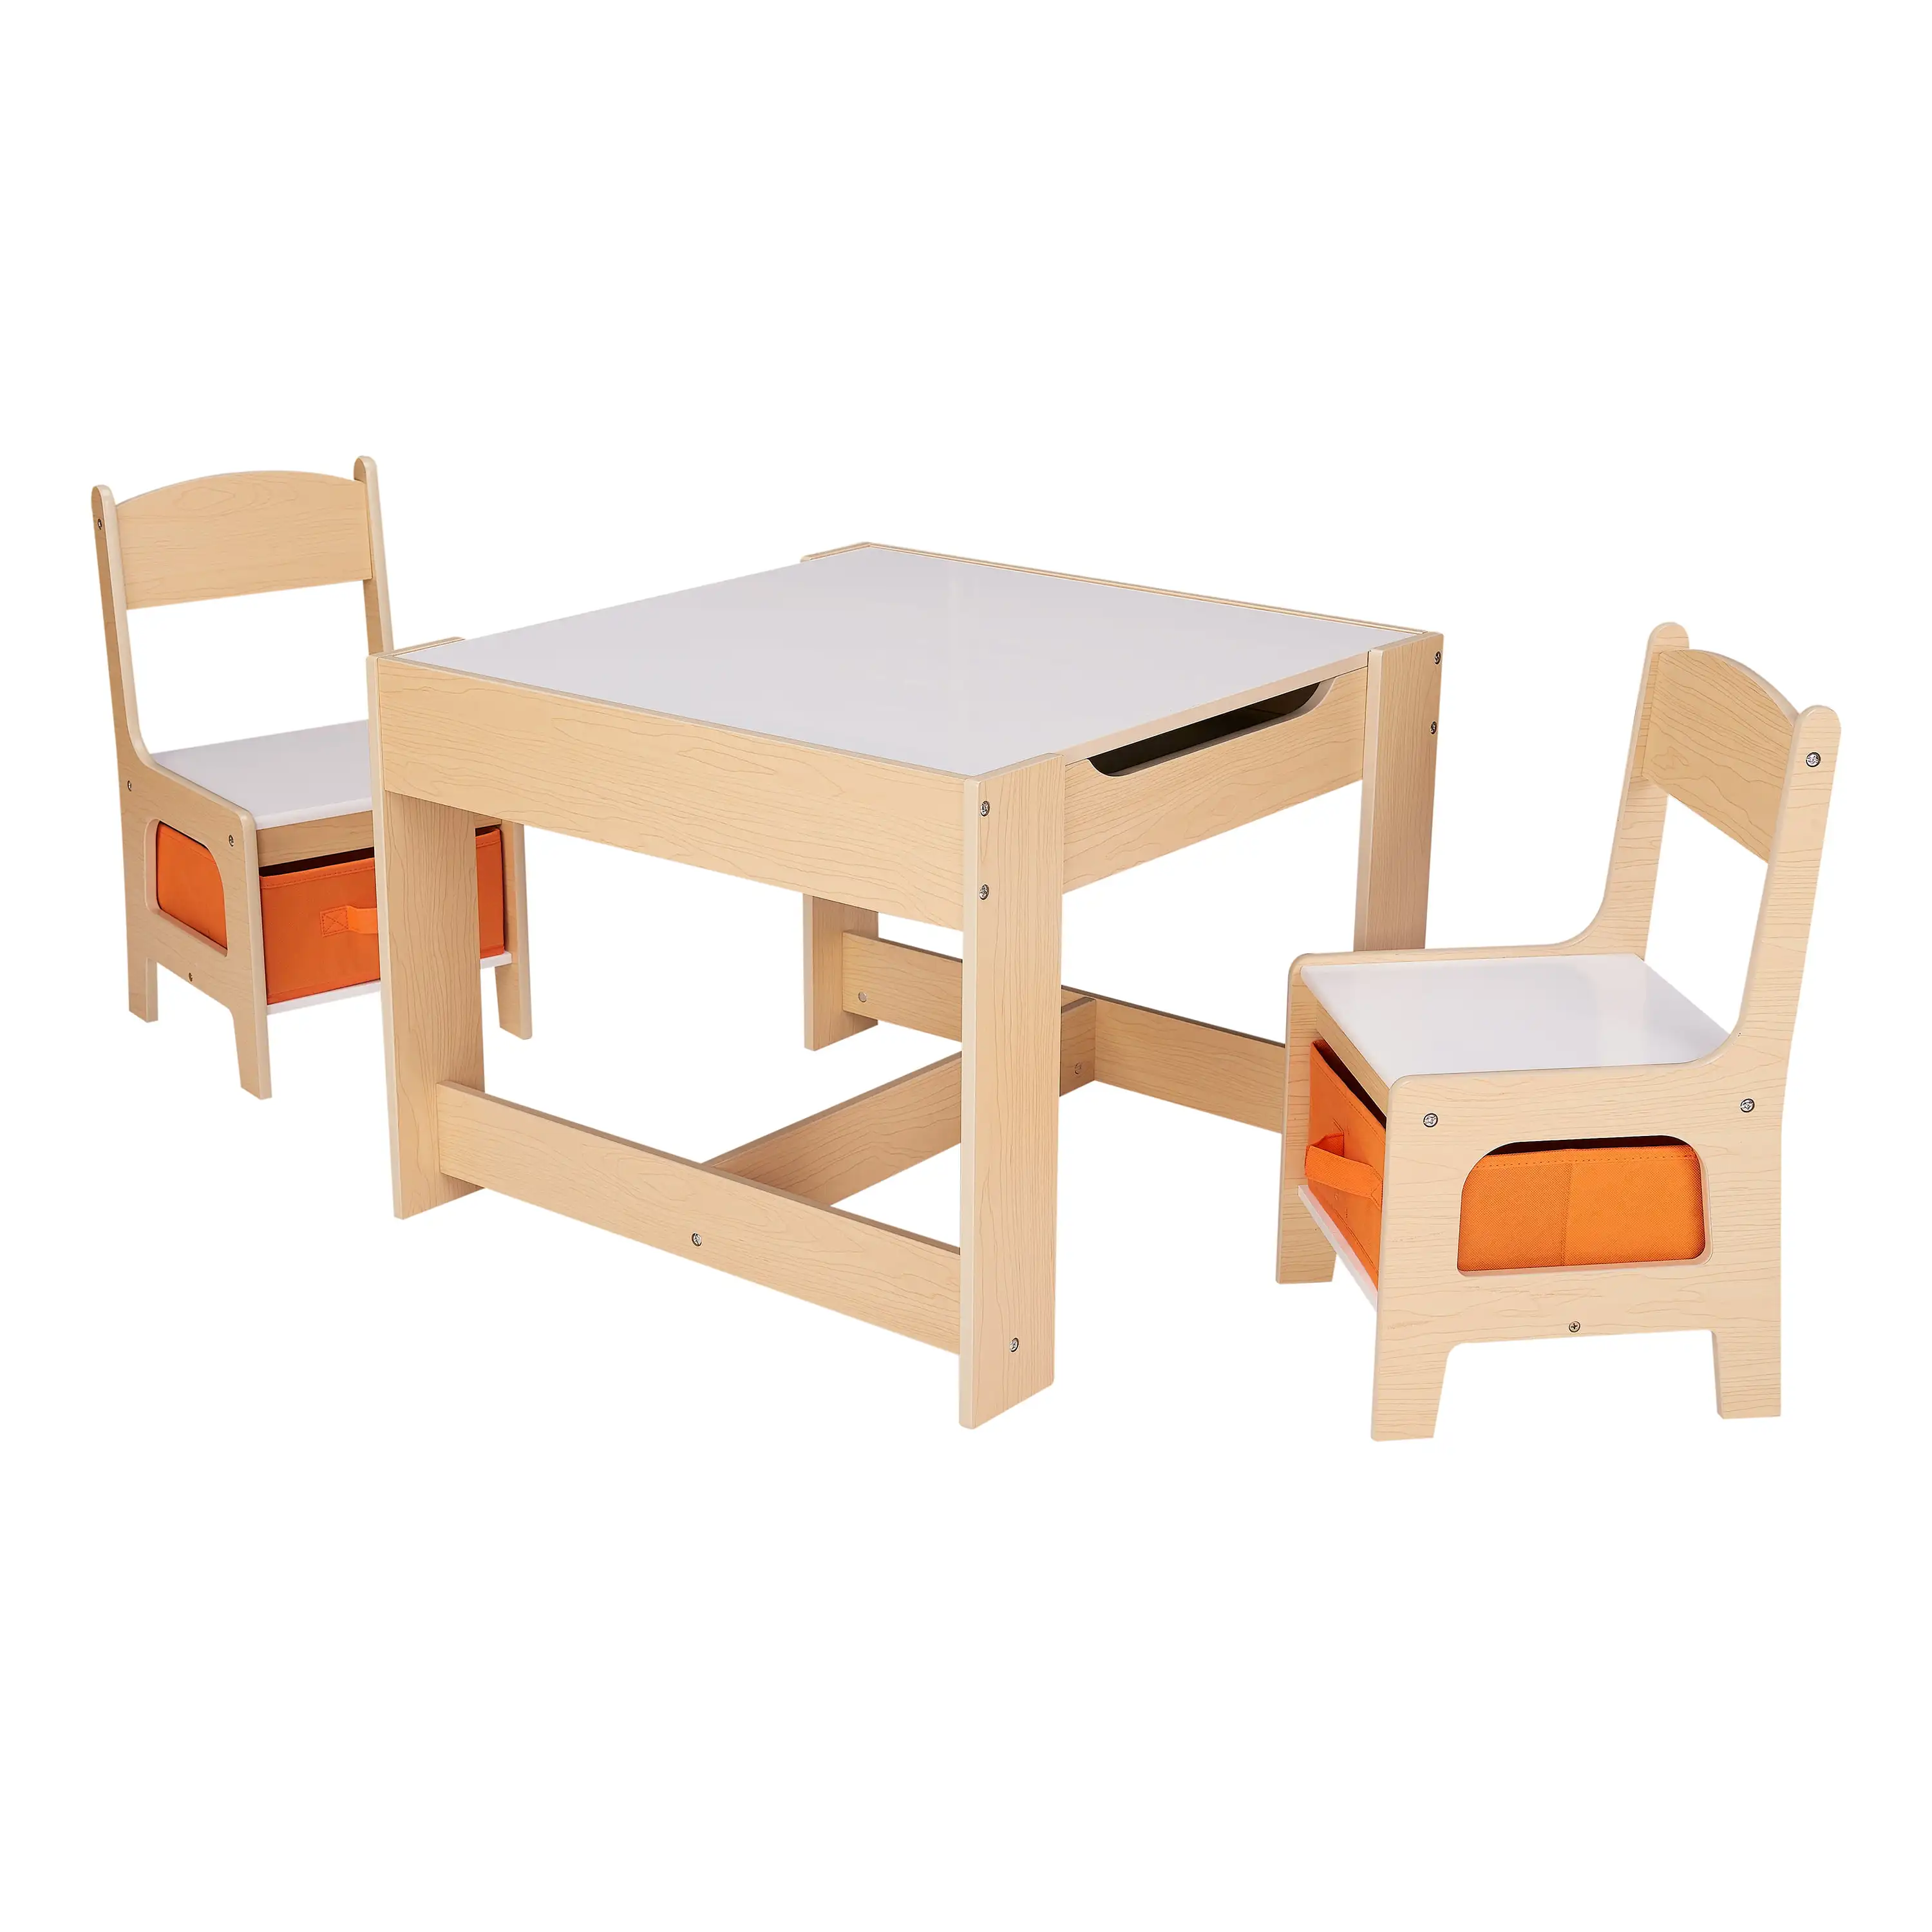 Kids Wooden Storage Table and Chairs Set, Natural Color, Melamine, 3 Piece Natural